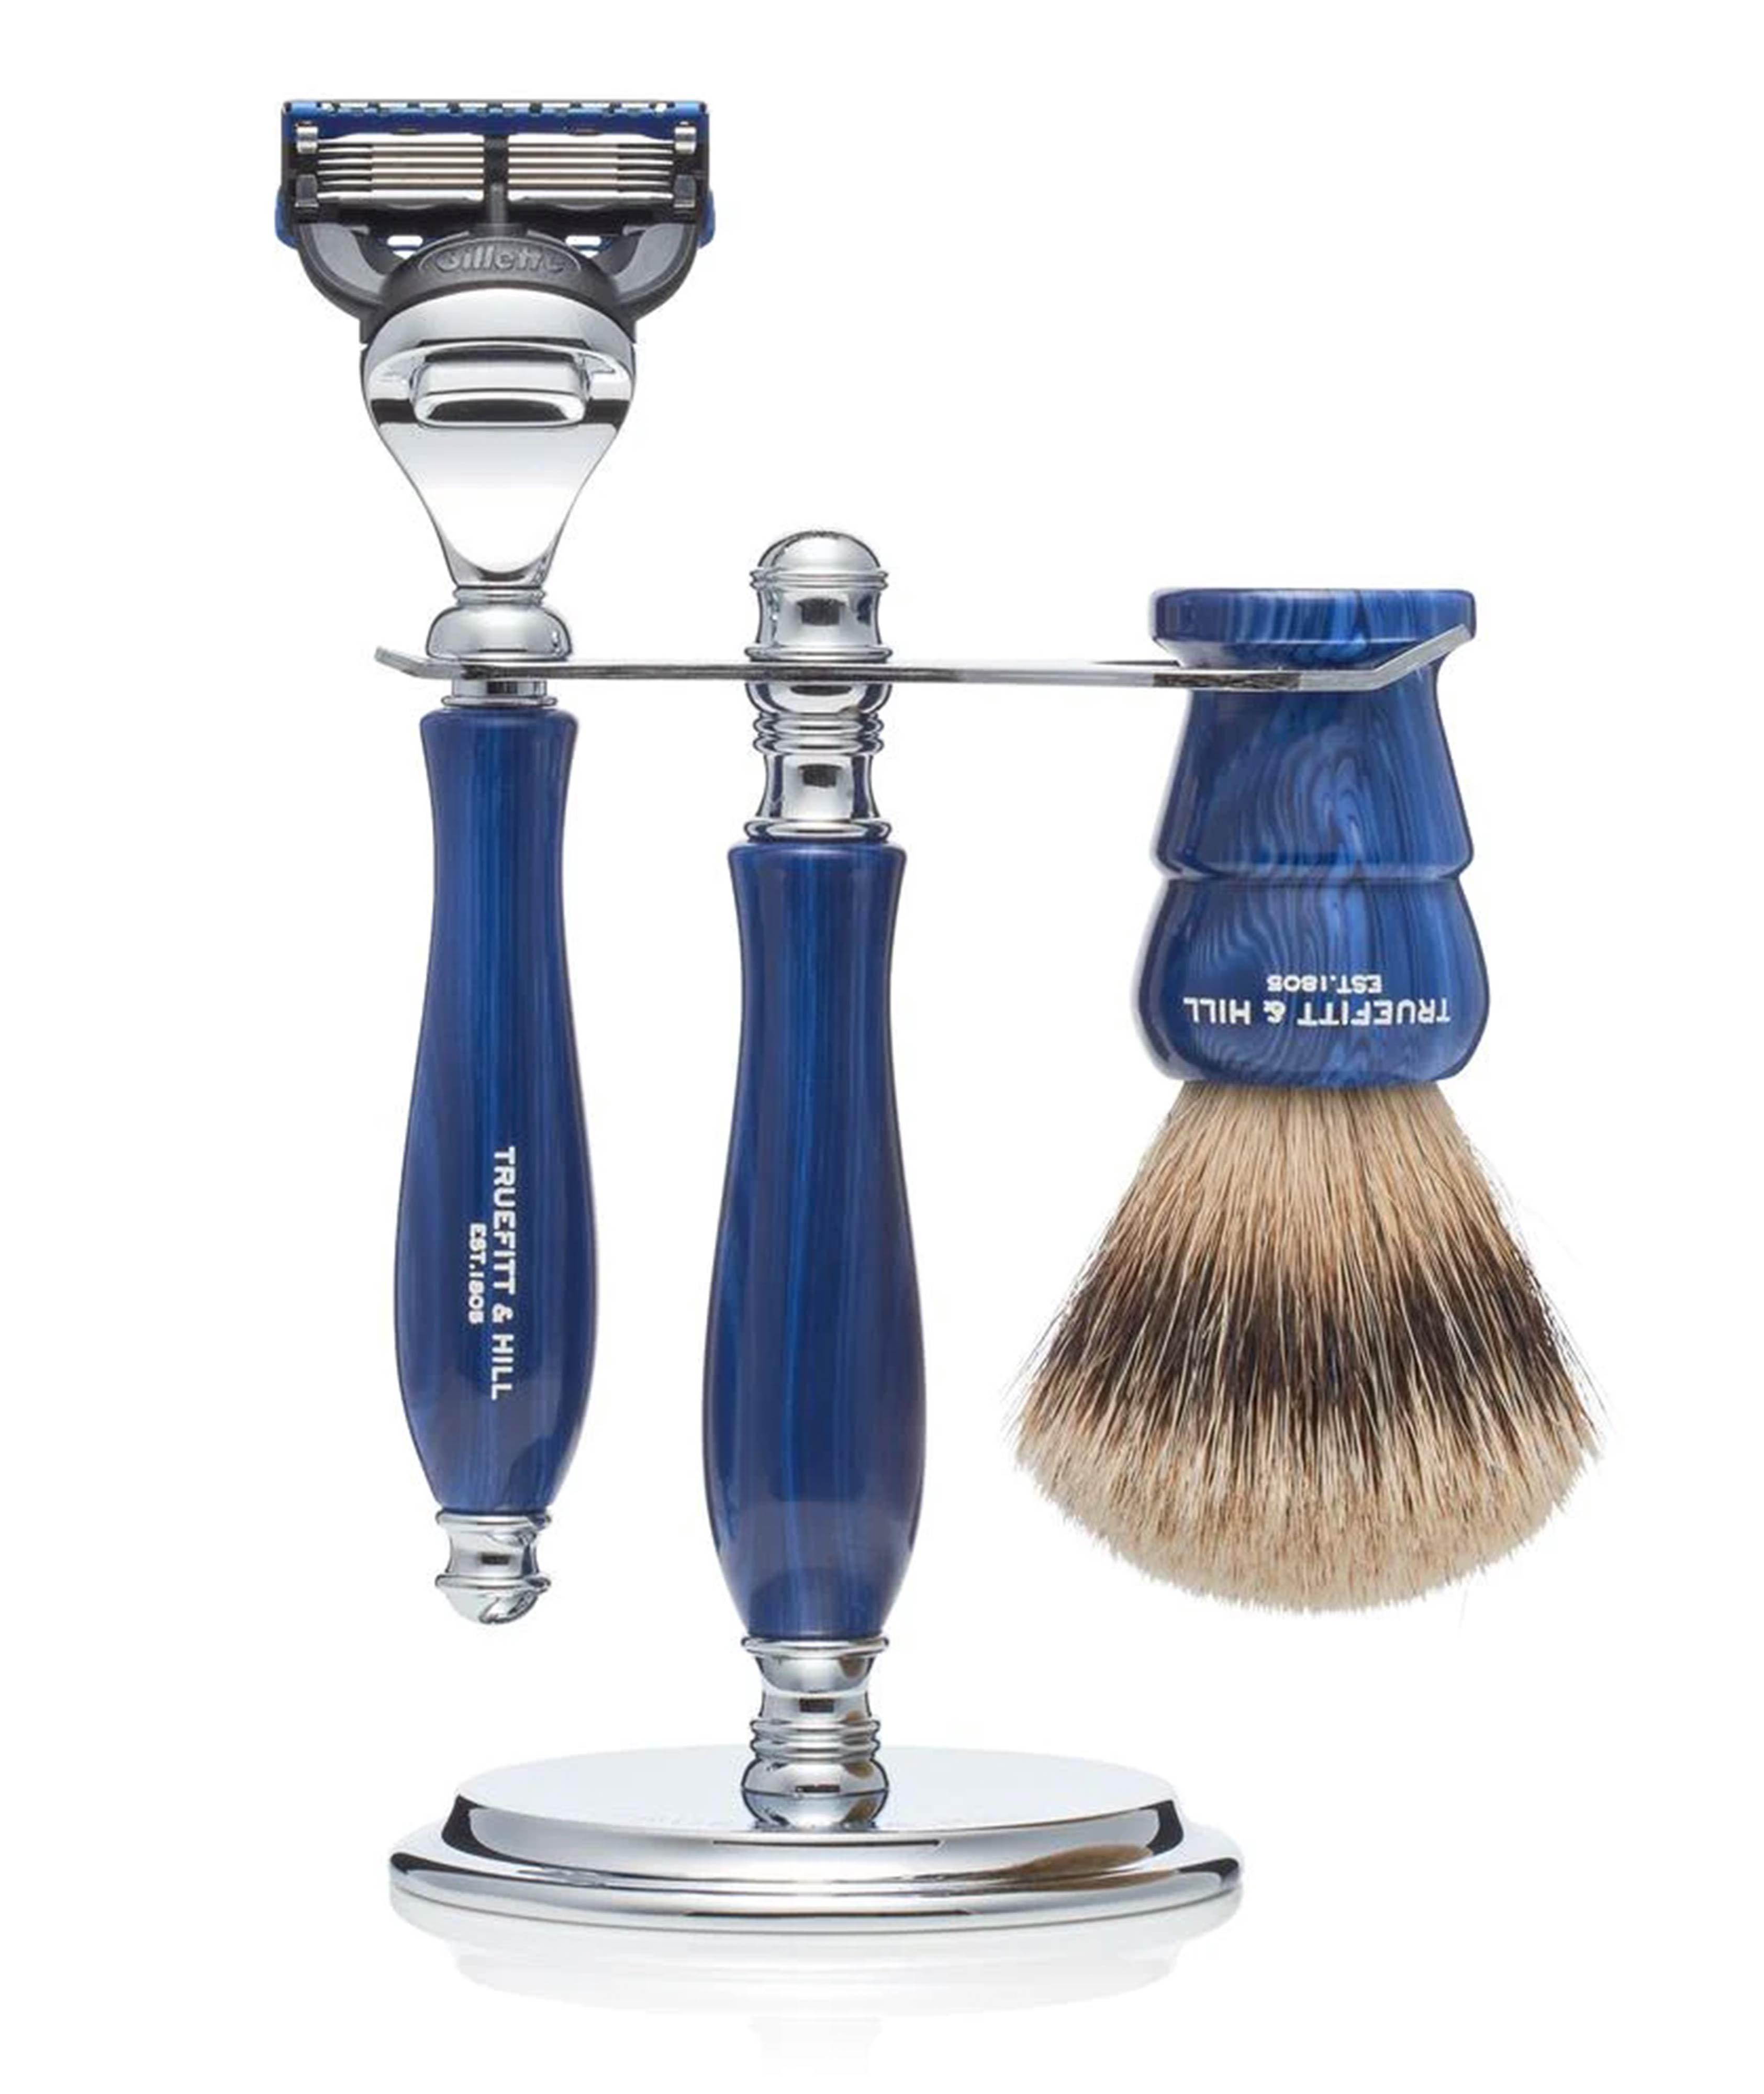 Jubilee Collection Faux Blue Opal: Silvertip Badger Brush/Fusion Razor/Stand image 0